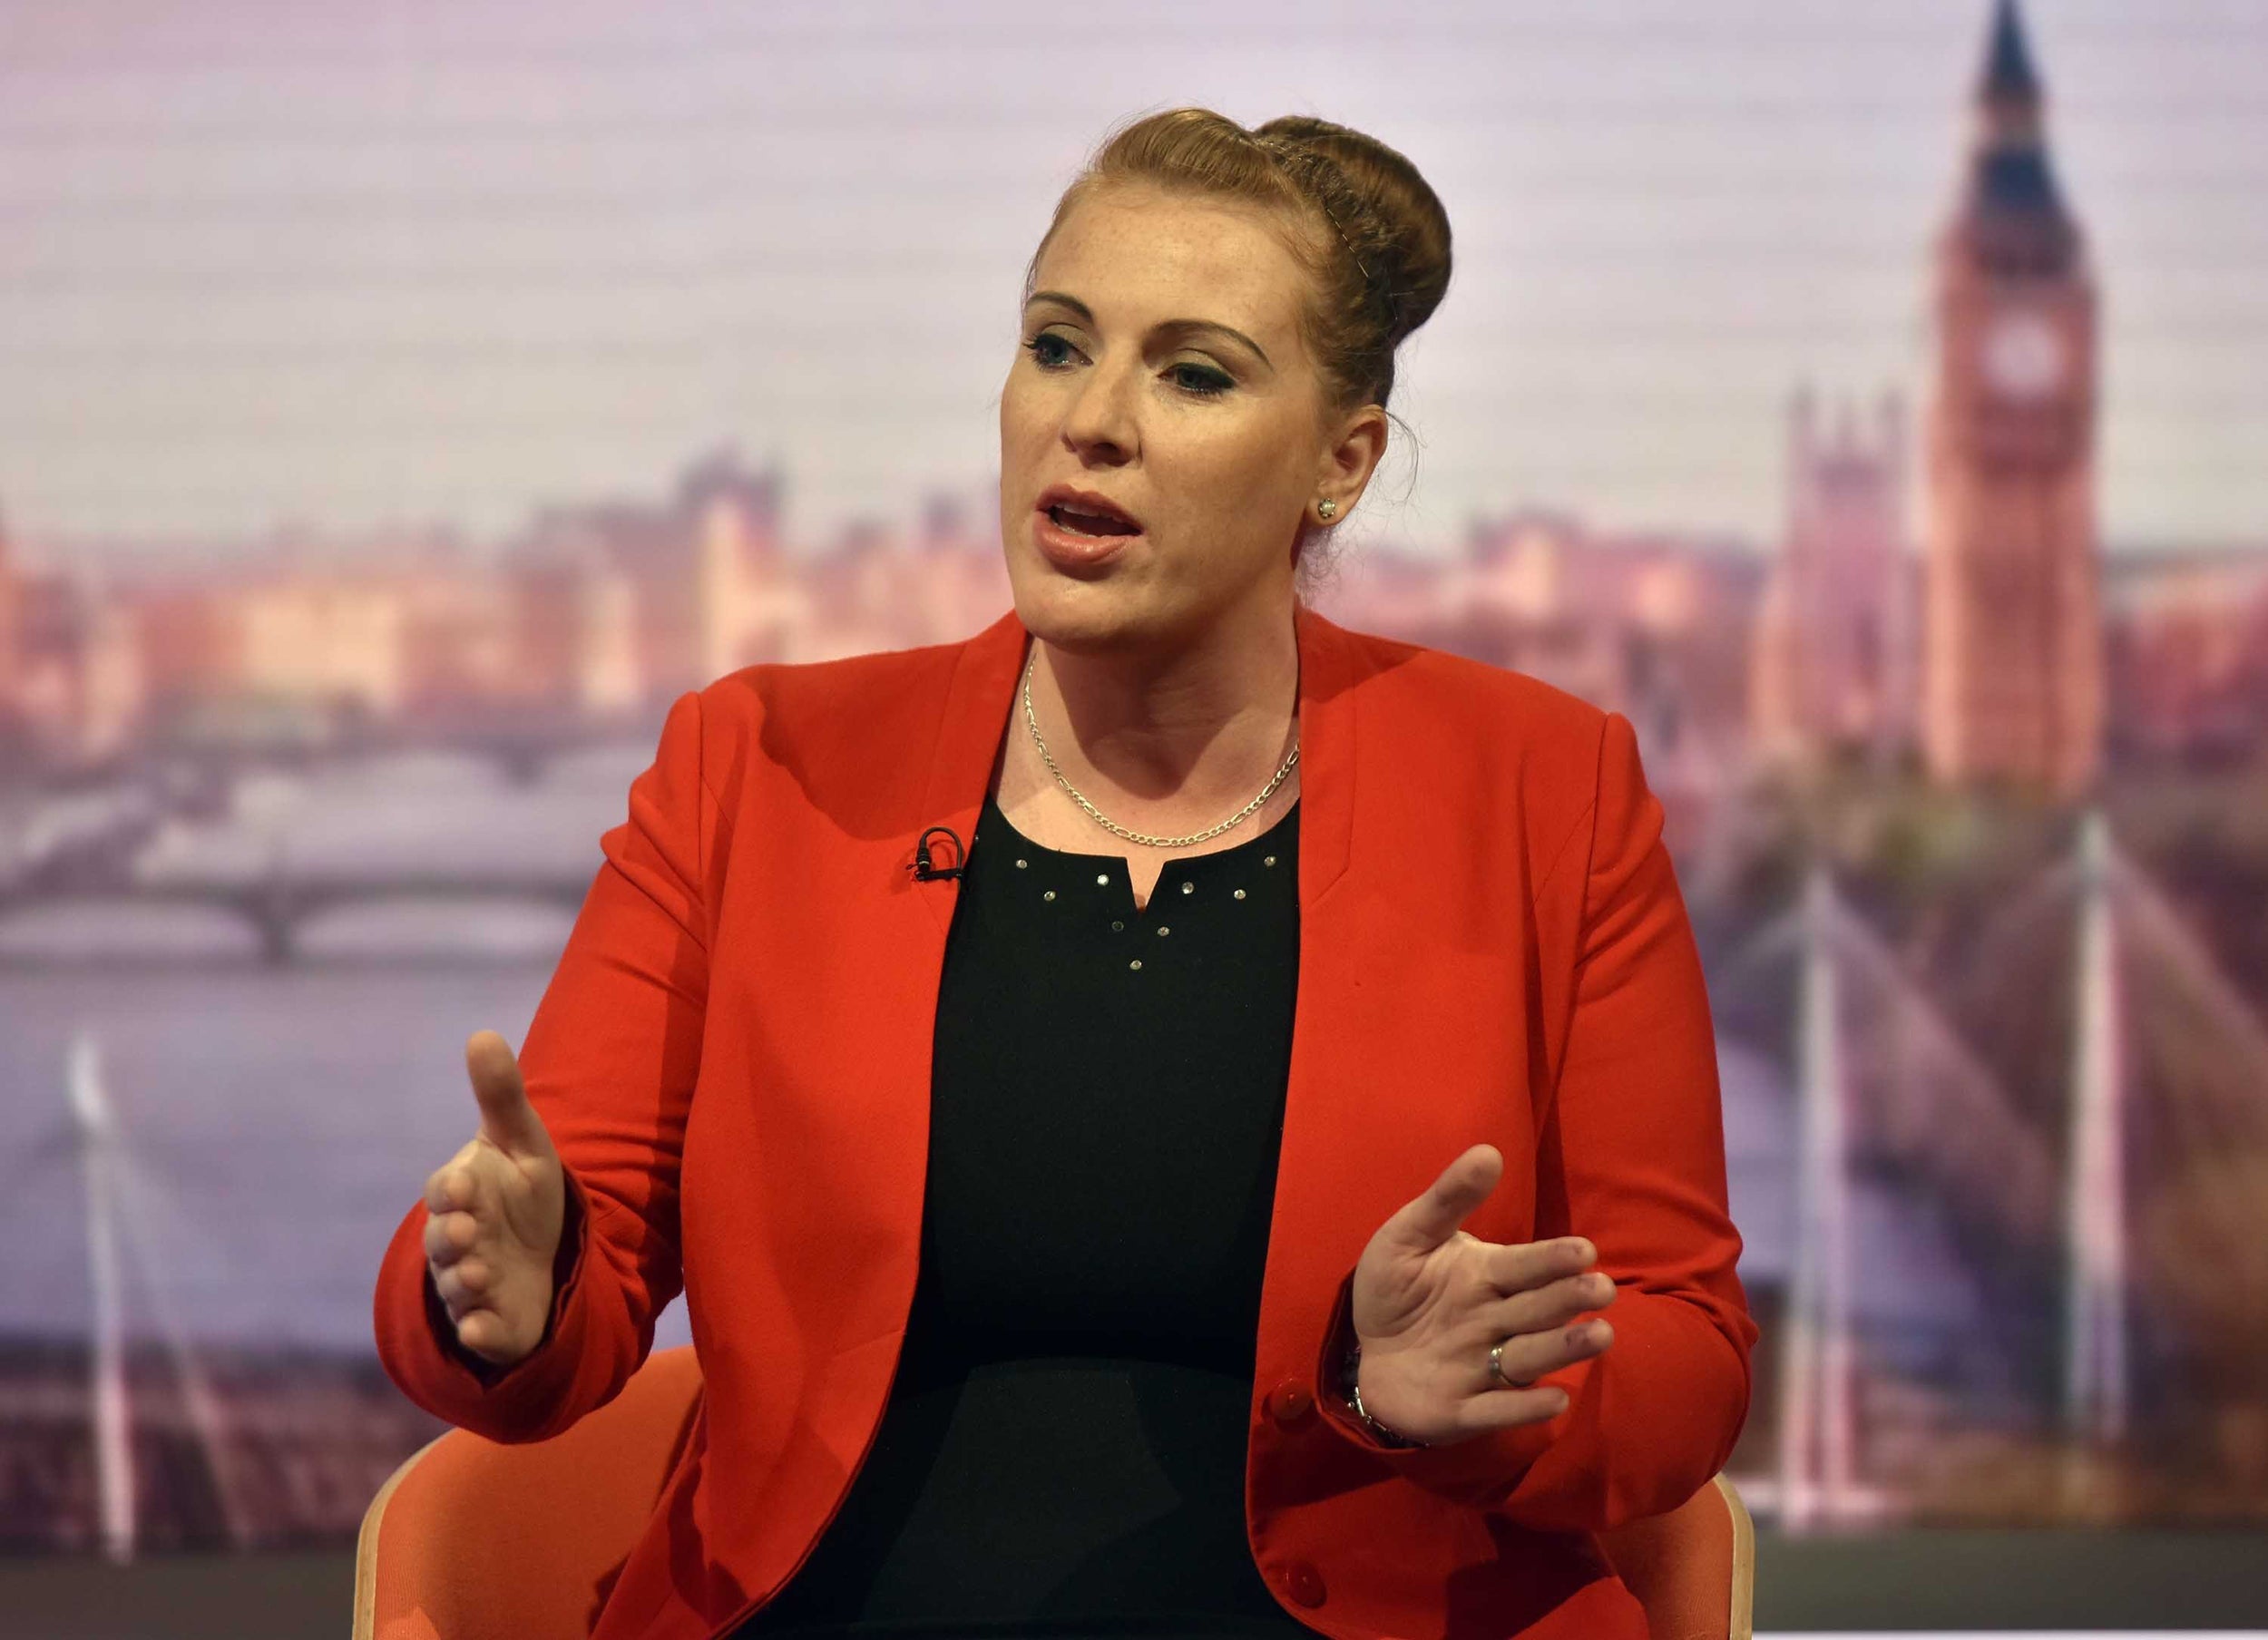 Angela Rayner's performance on the Andrew Marr show inspired little confidence in her party